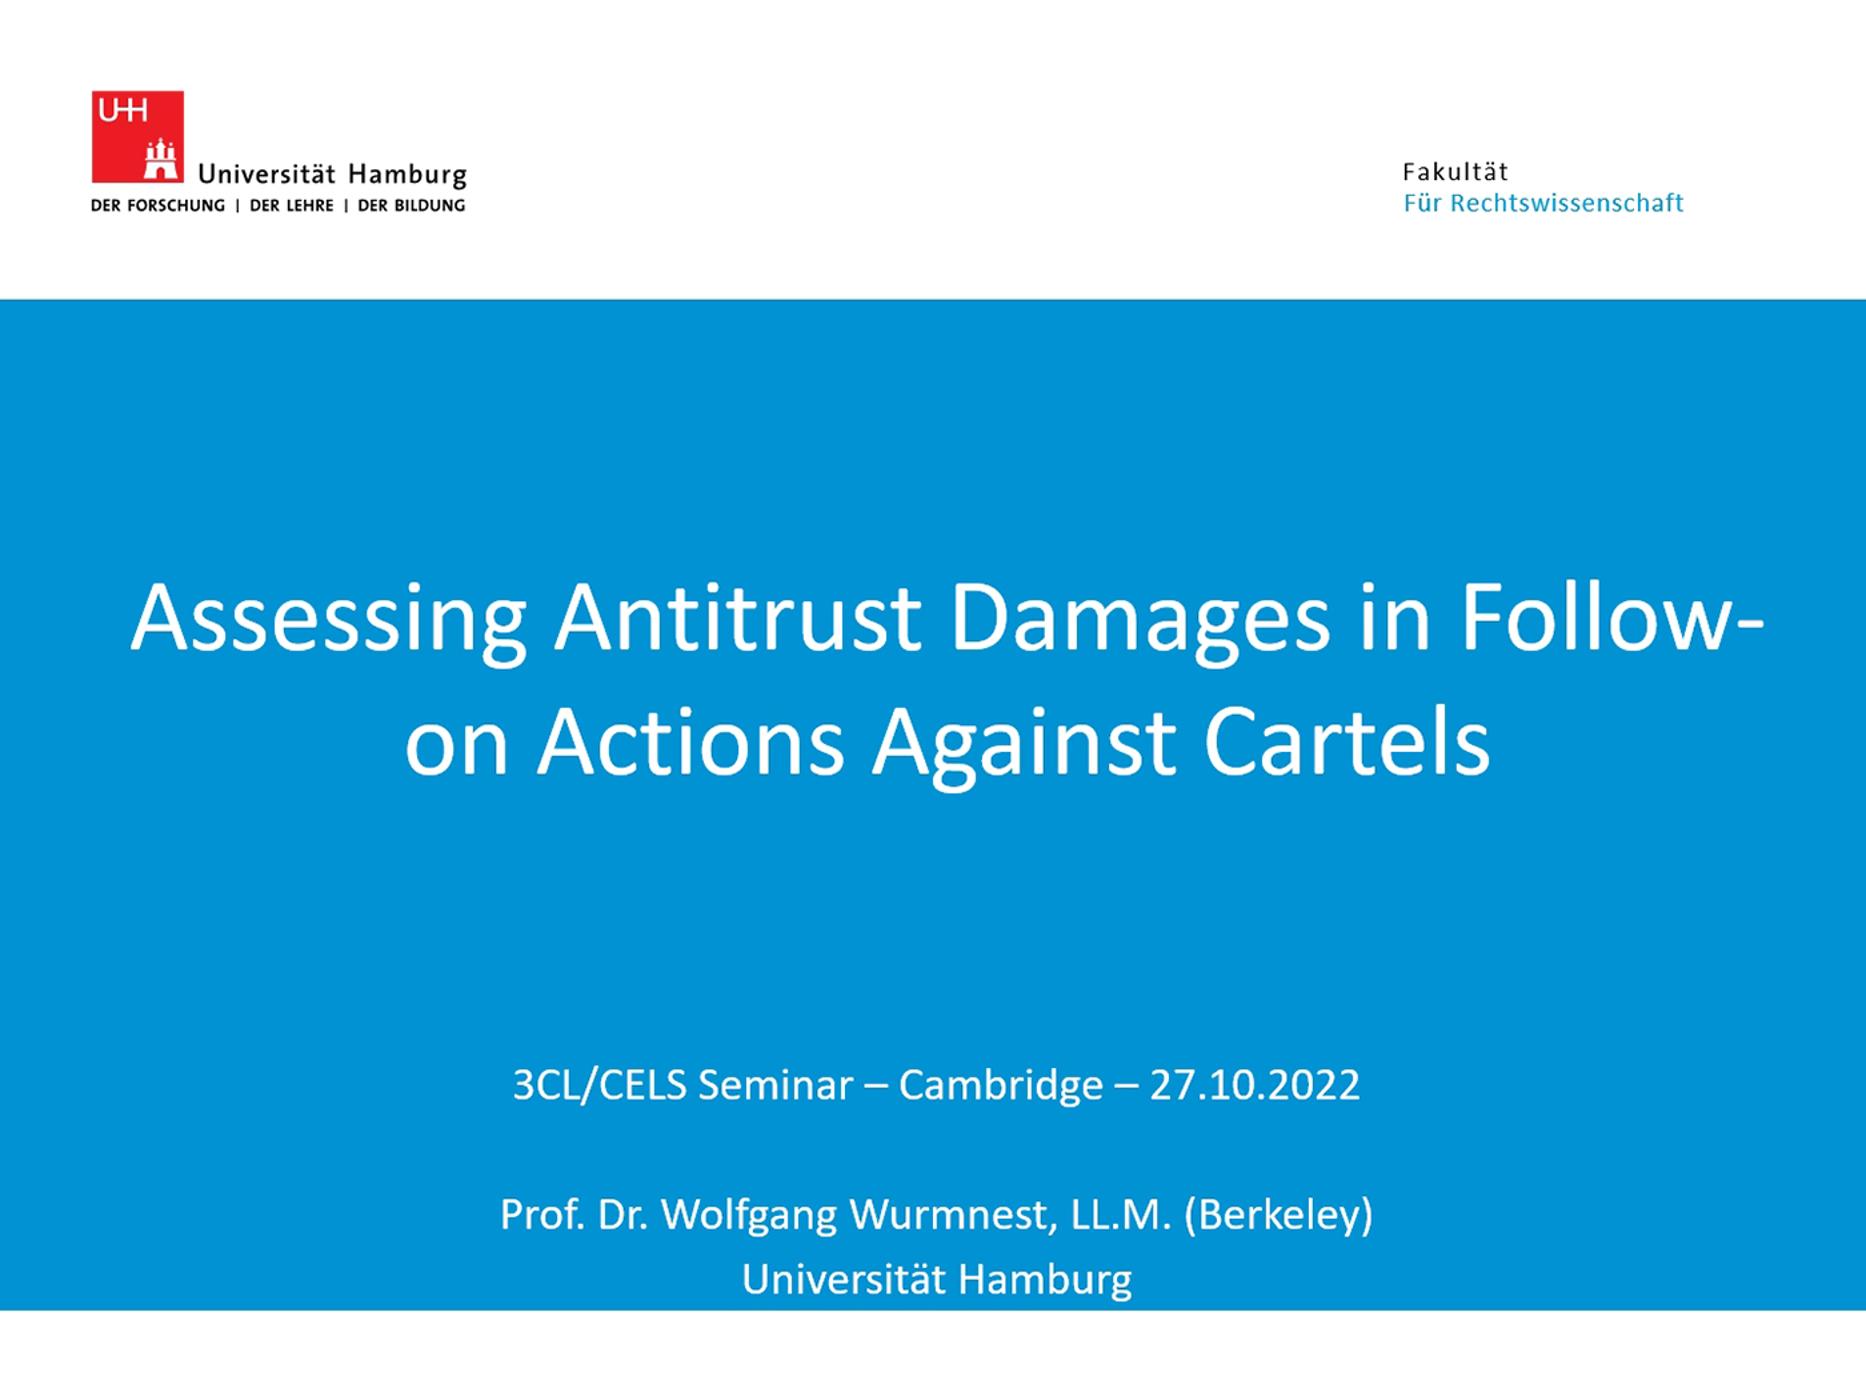 'Assessing Antitrust Damages in Follow-on Actions Against Cartels': 3CL Travers Smith/CELS seminar